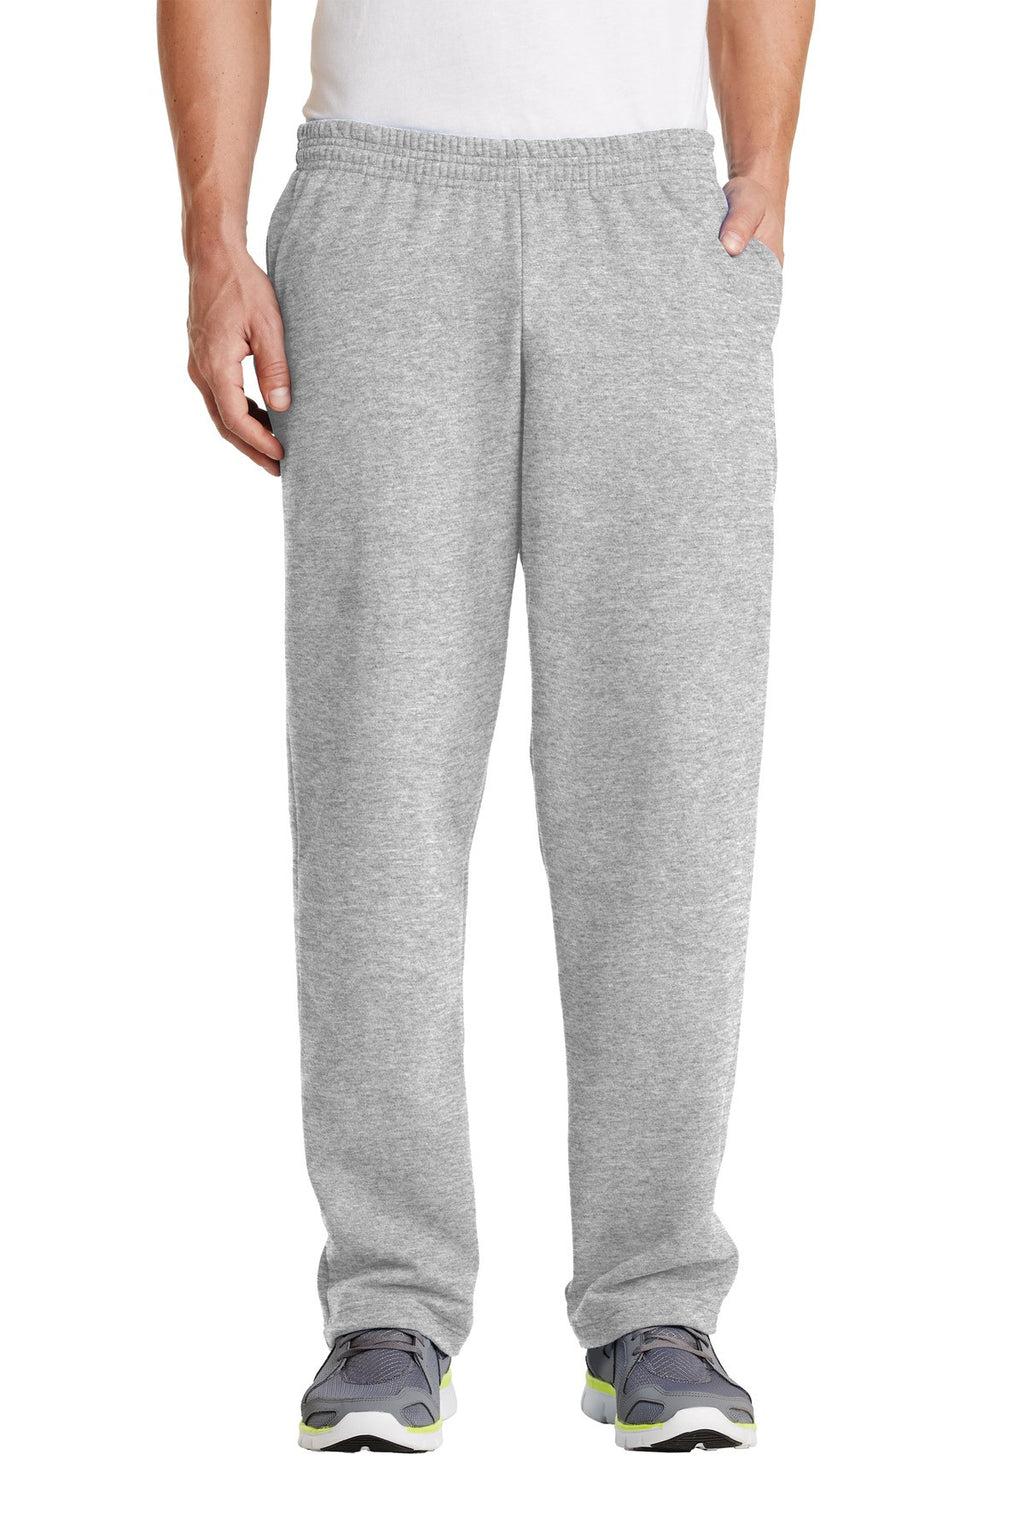 Port & Company Classic Open Bottom Sweatpant With Pockets-2